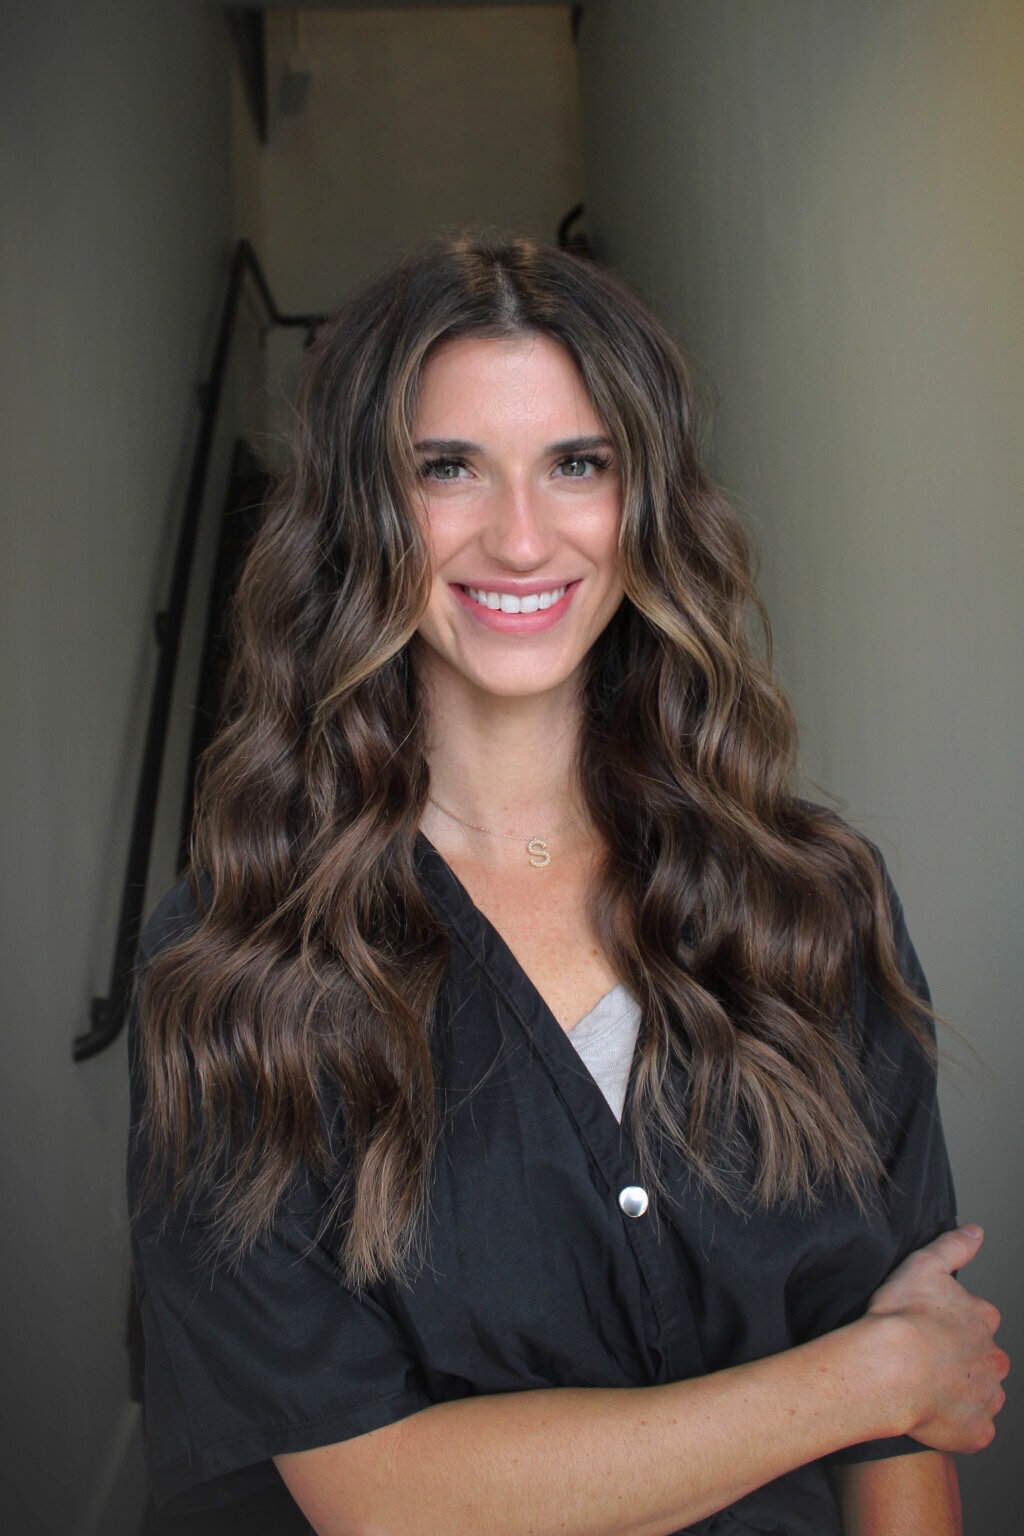 Smiling woman with long, voluminous brunette waves